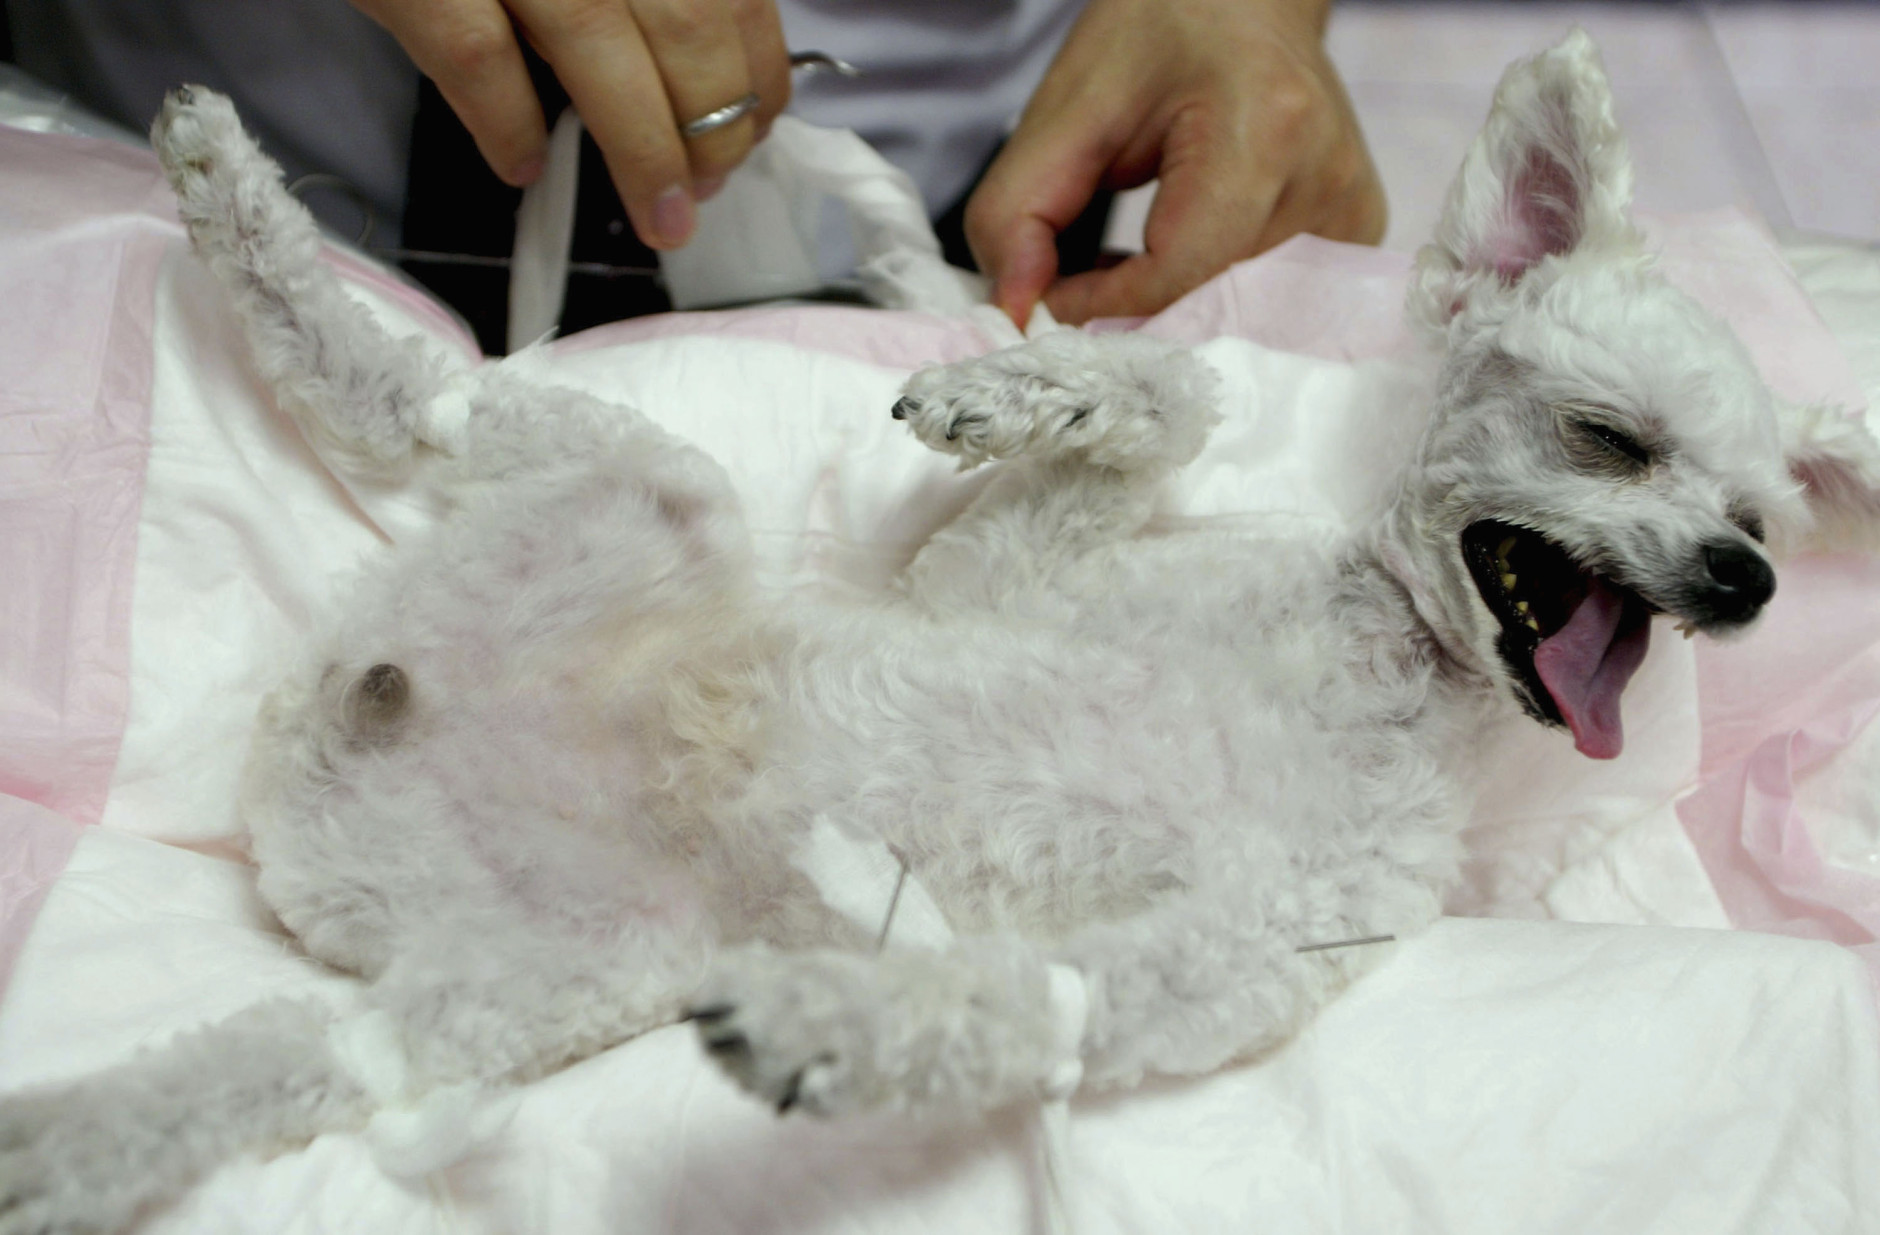 A dog receives acupunture treatment at a animal hospital on July 29, 2005 in Bundang, South Korea. The classical Eastern explanation for how acupuncture works is that channels of energy or Qi run in regular patterns through the body and over its surface. These channels, called meridians, are like rivers flowing through the body to irrigate and nourish the tissues. An obstruction in the movement of these energy rivers is like a dam that backs up, creating imbalance and pain. Stimulating the acupuncture points can influence the meridians; the acupuncture needles unblock the obstructions at the dams, and reestablish the regular flow through the meridians. Acupuncture is the stimulation of specific points located near or on the surface of the skin which have the ability to alter various biochemical and physiological conditions in order to achieve the desired effect. (Photo by Chung Sung-Jun/Getty Images)